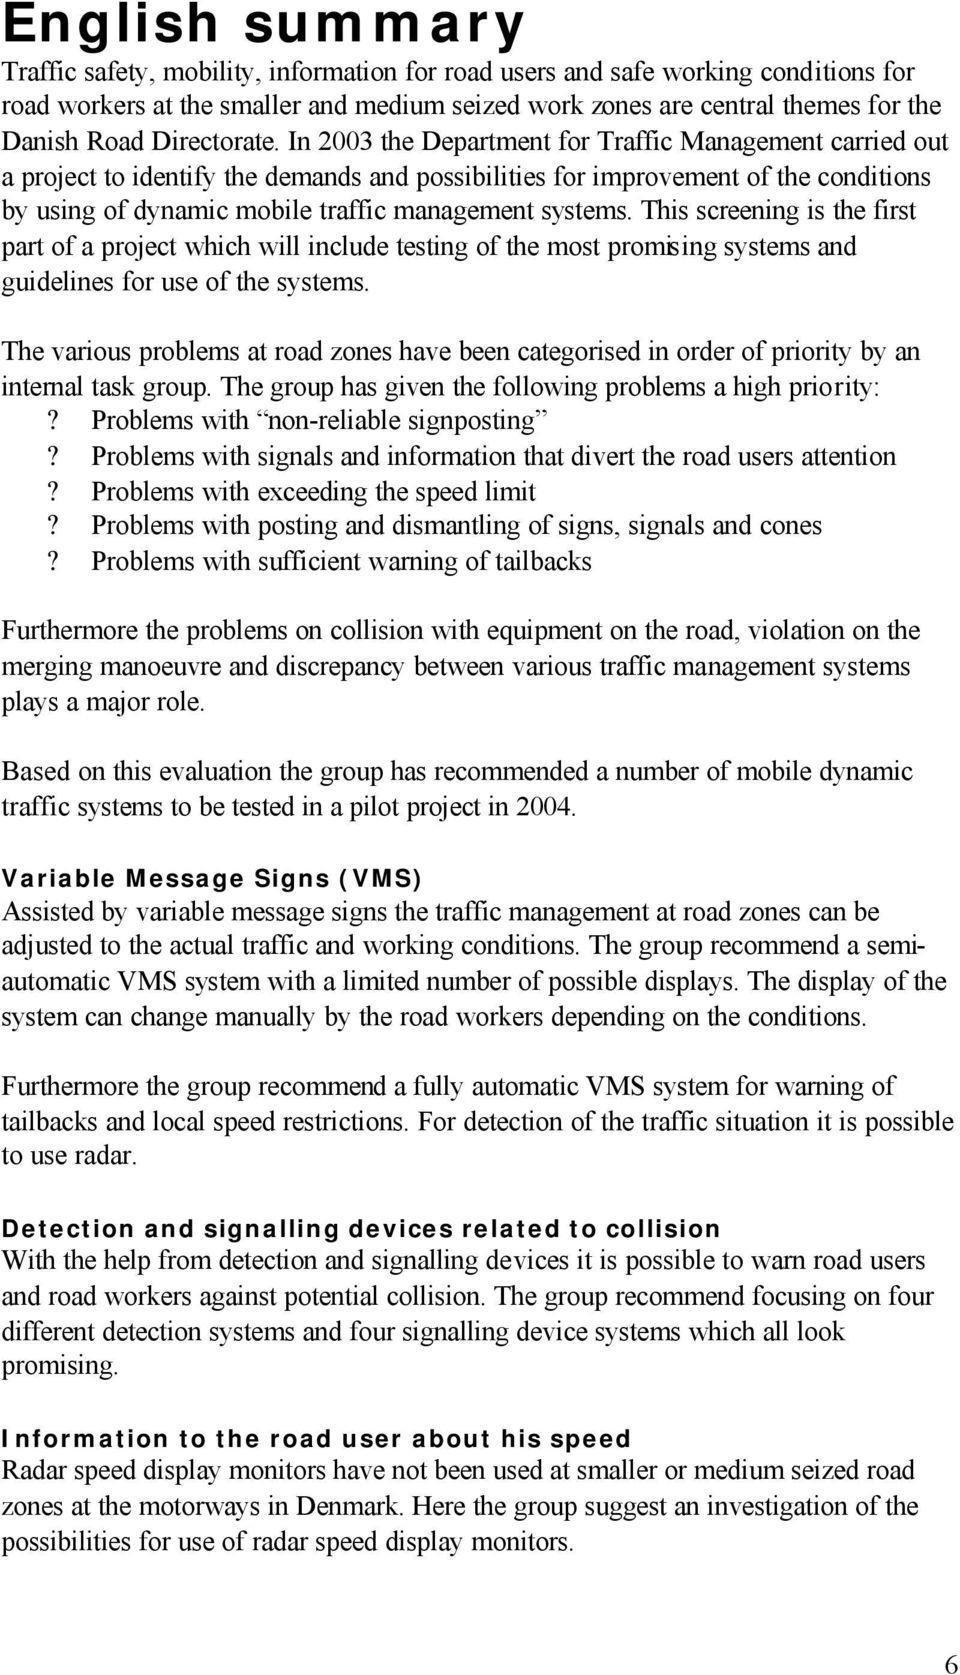 In 2003 the Department for Traffic Management carried out a project to identify the demands and possibilities for improvement of the conditions by using of dynamic mobile traffic management systems.